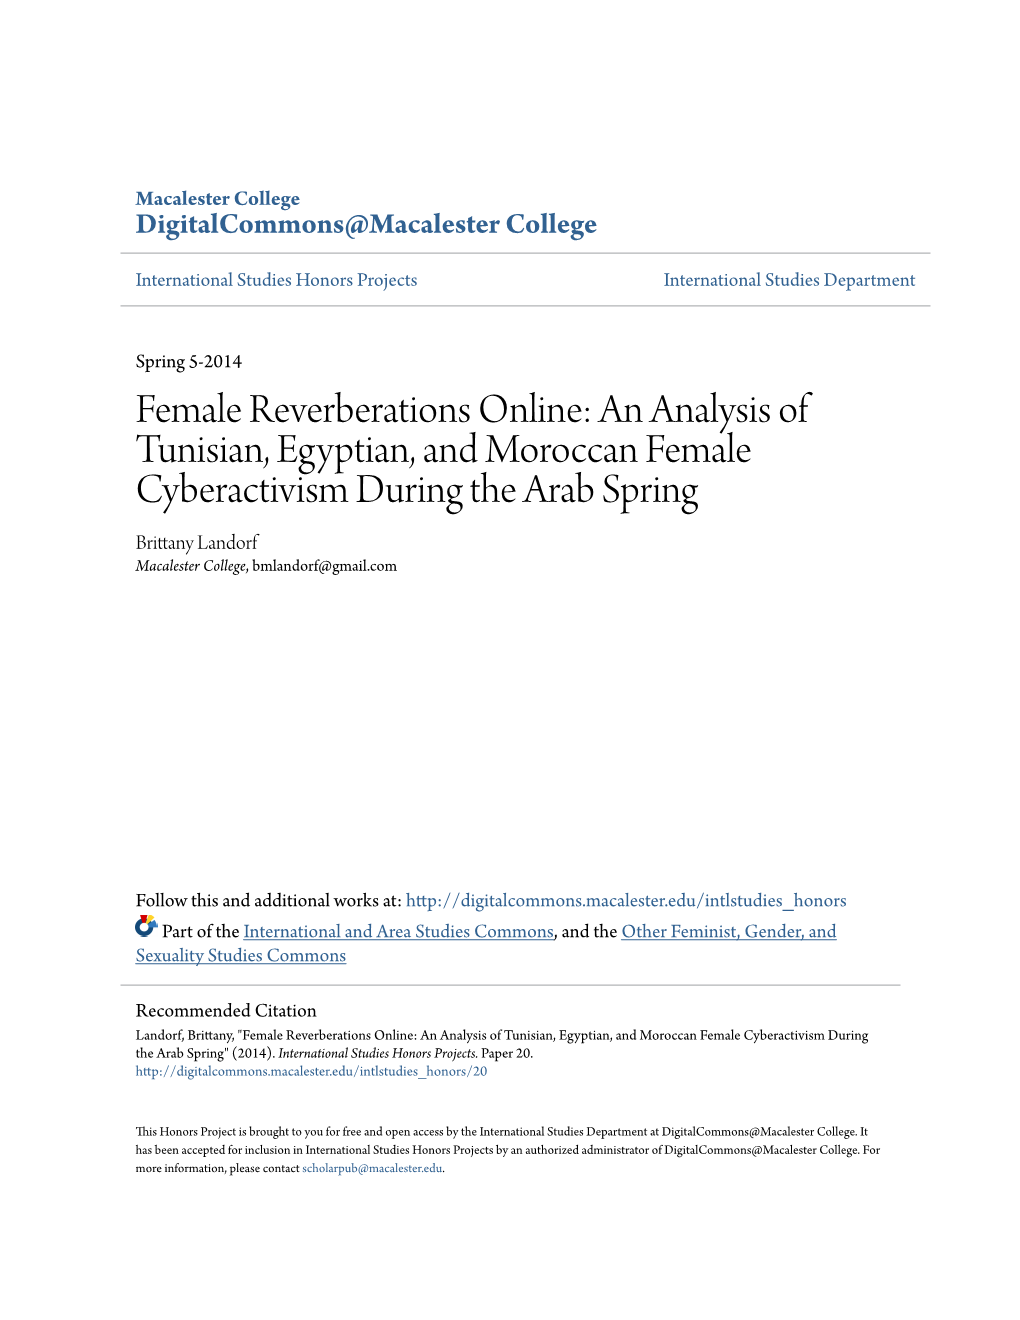 An Analysis of Tunisian, Egyptian, and Moroccan Female Cyberactivism During the Arab Spring Brittany Landorf Macalester College, Bmlandorf@Gmail.Com